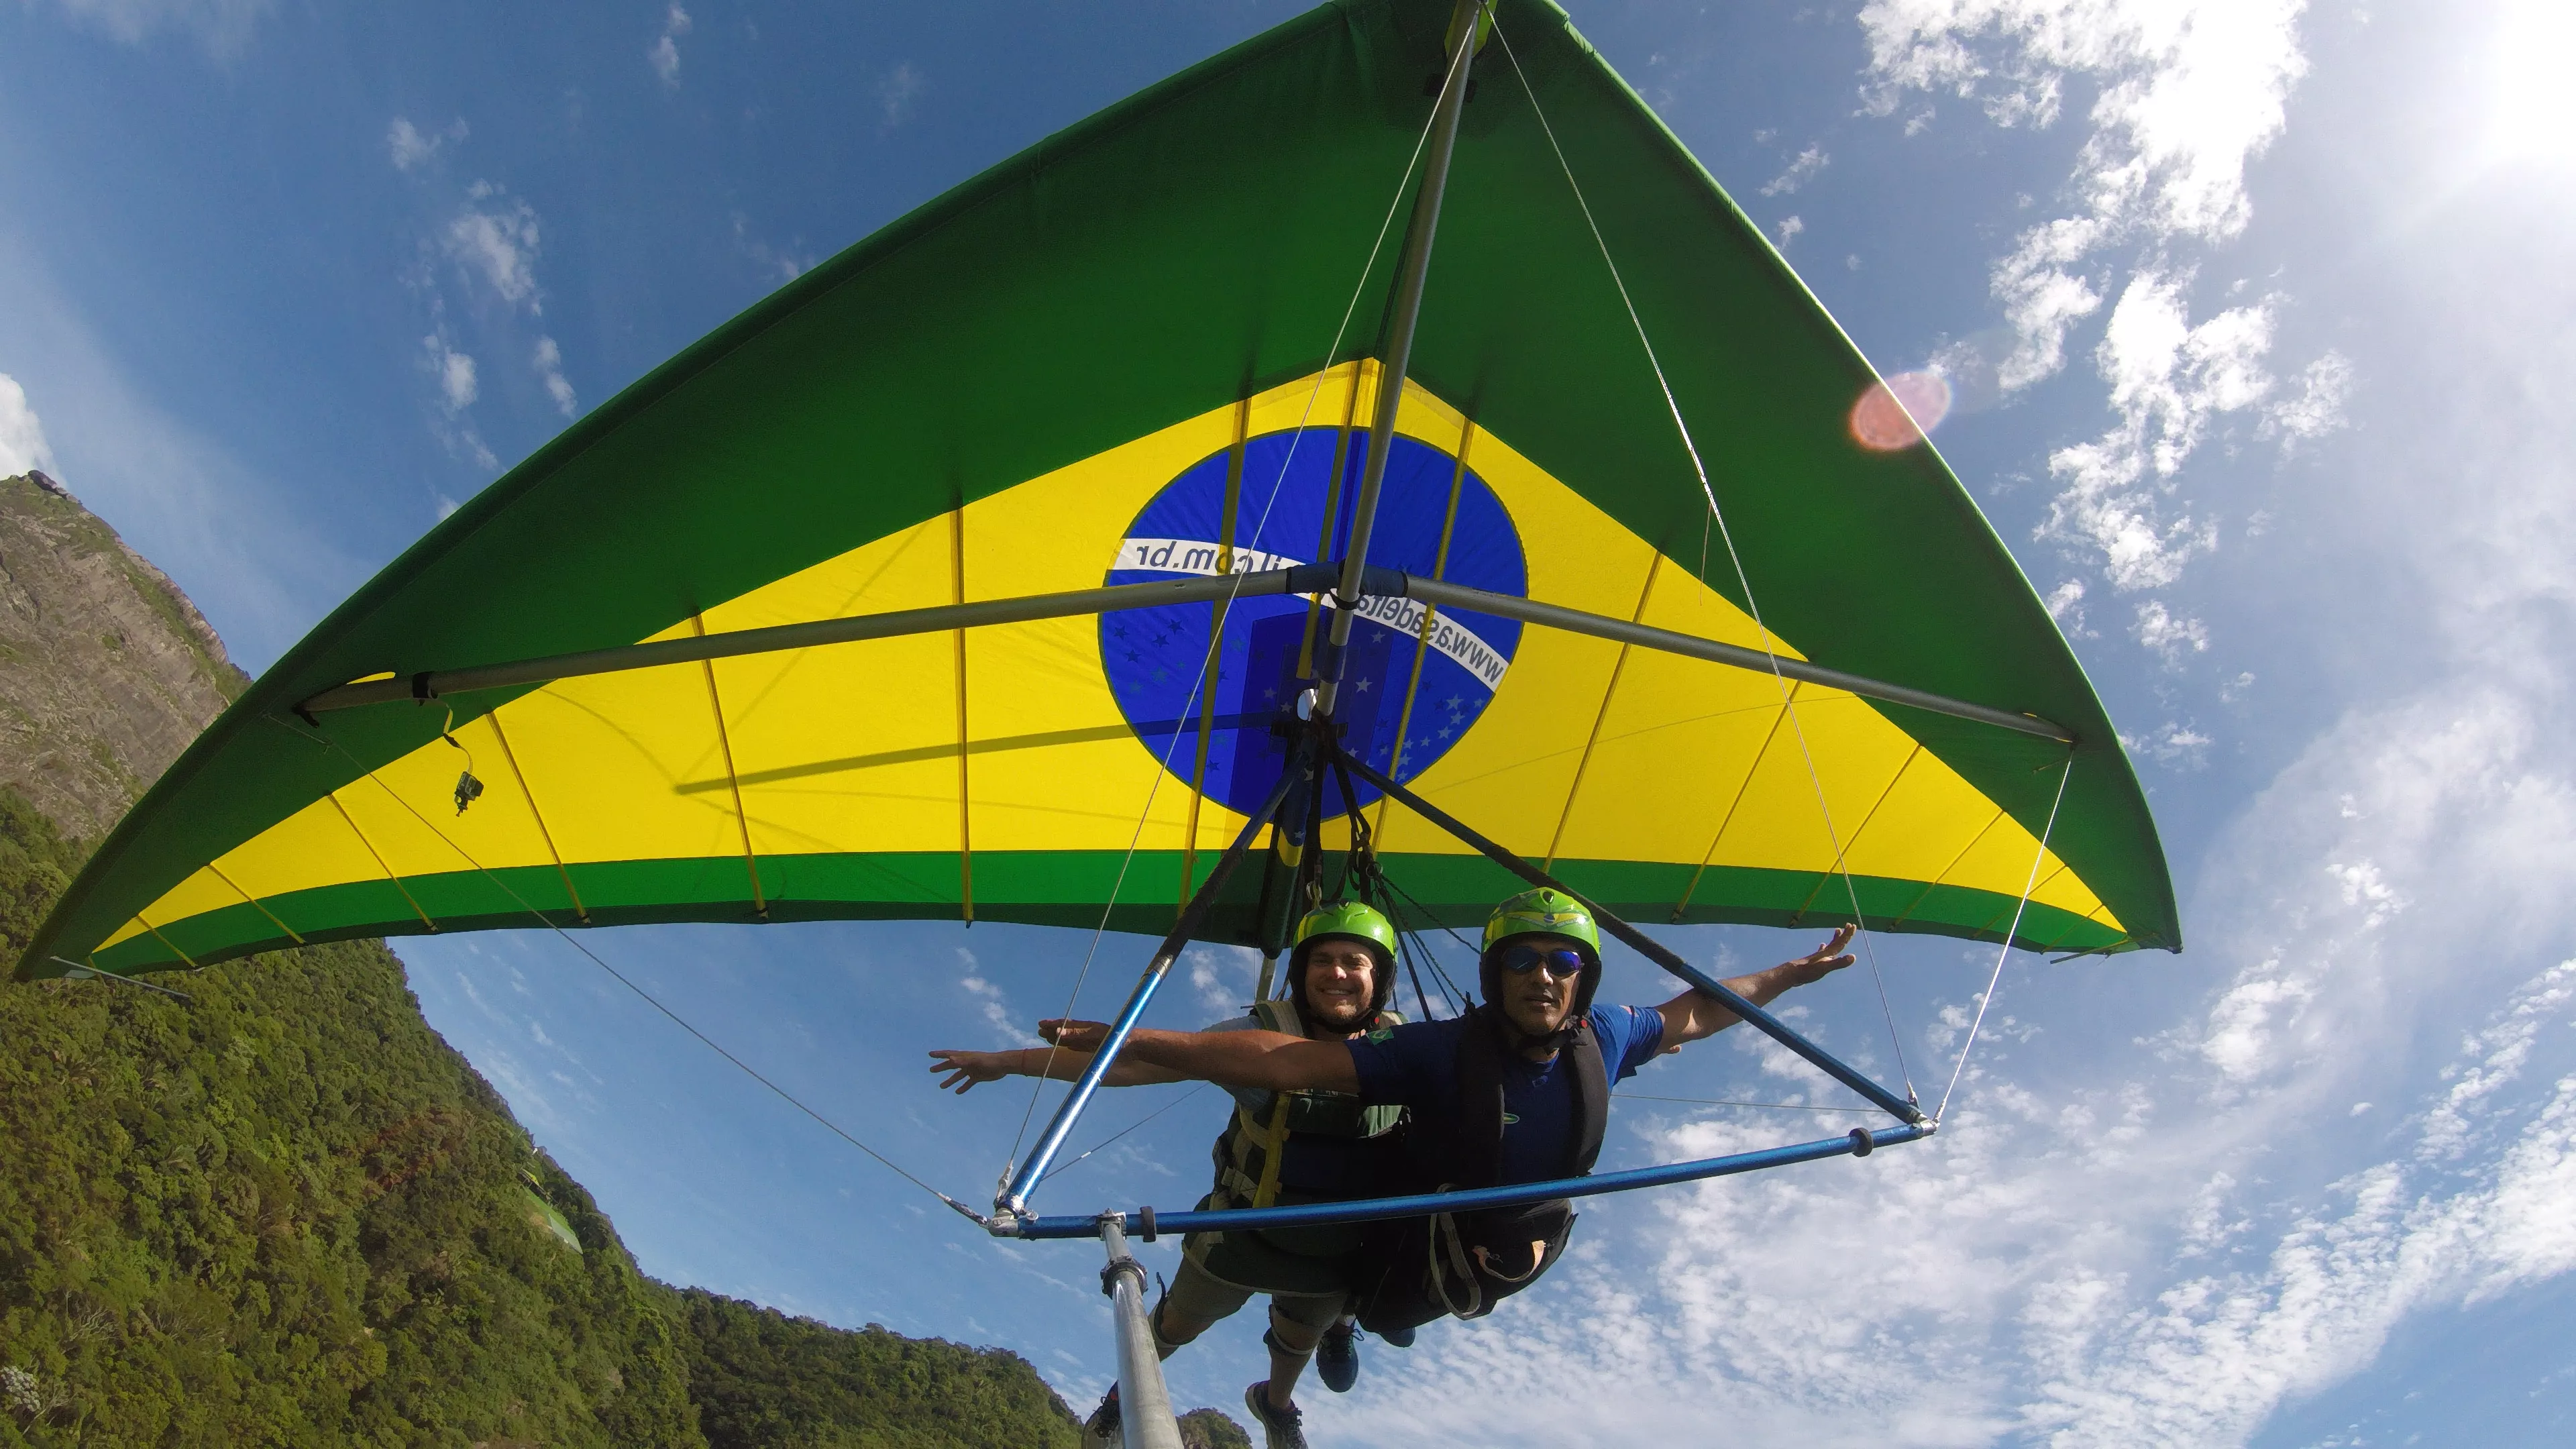 Hang Gliding Rio Jpxfly in Brazil, South America | Hang Gliding - Rated 1